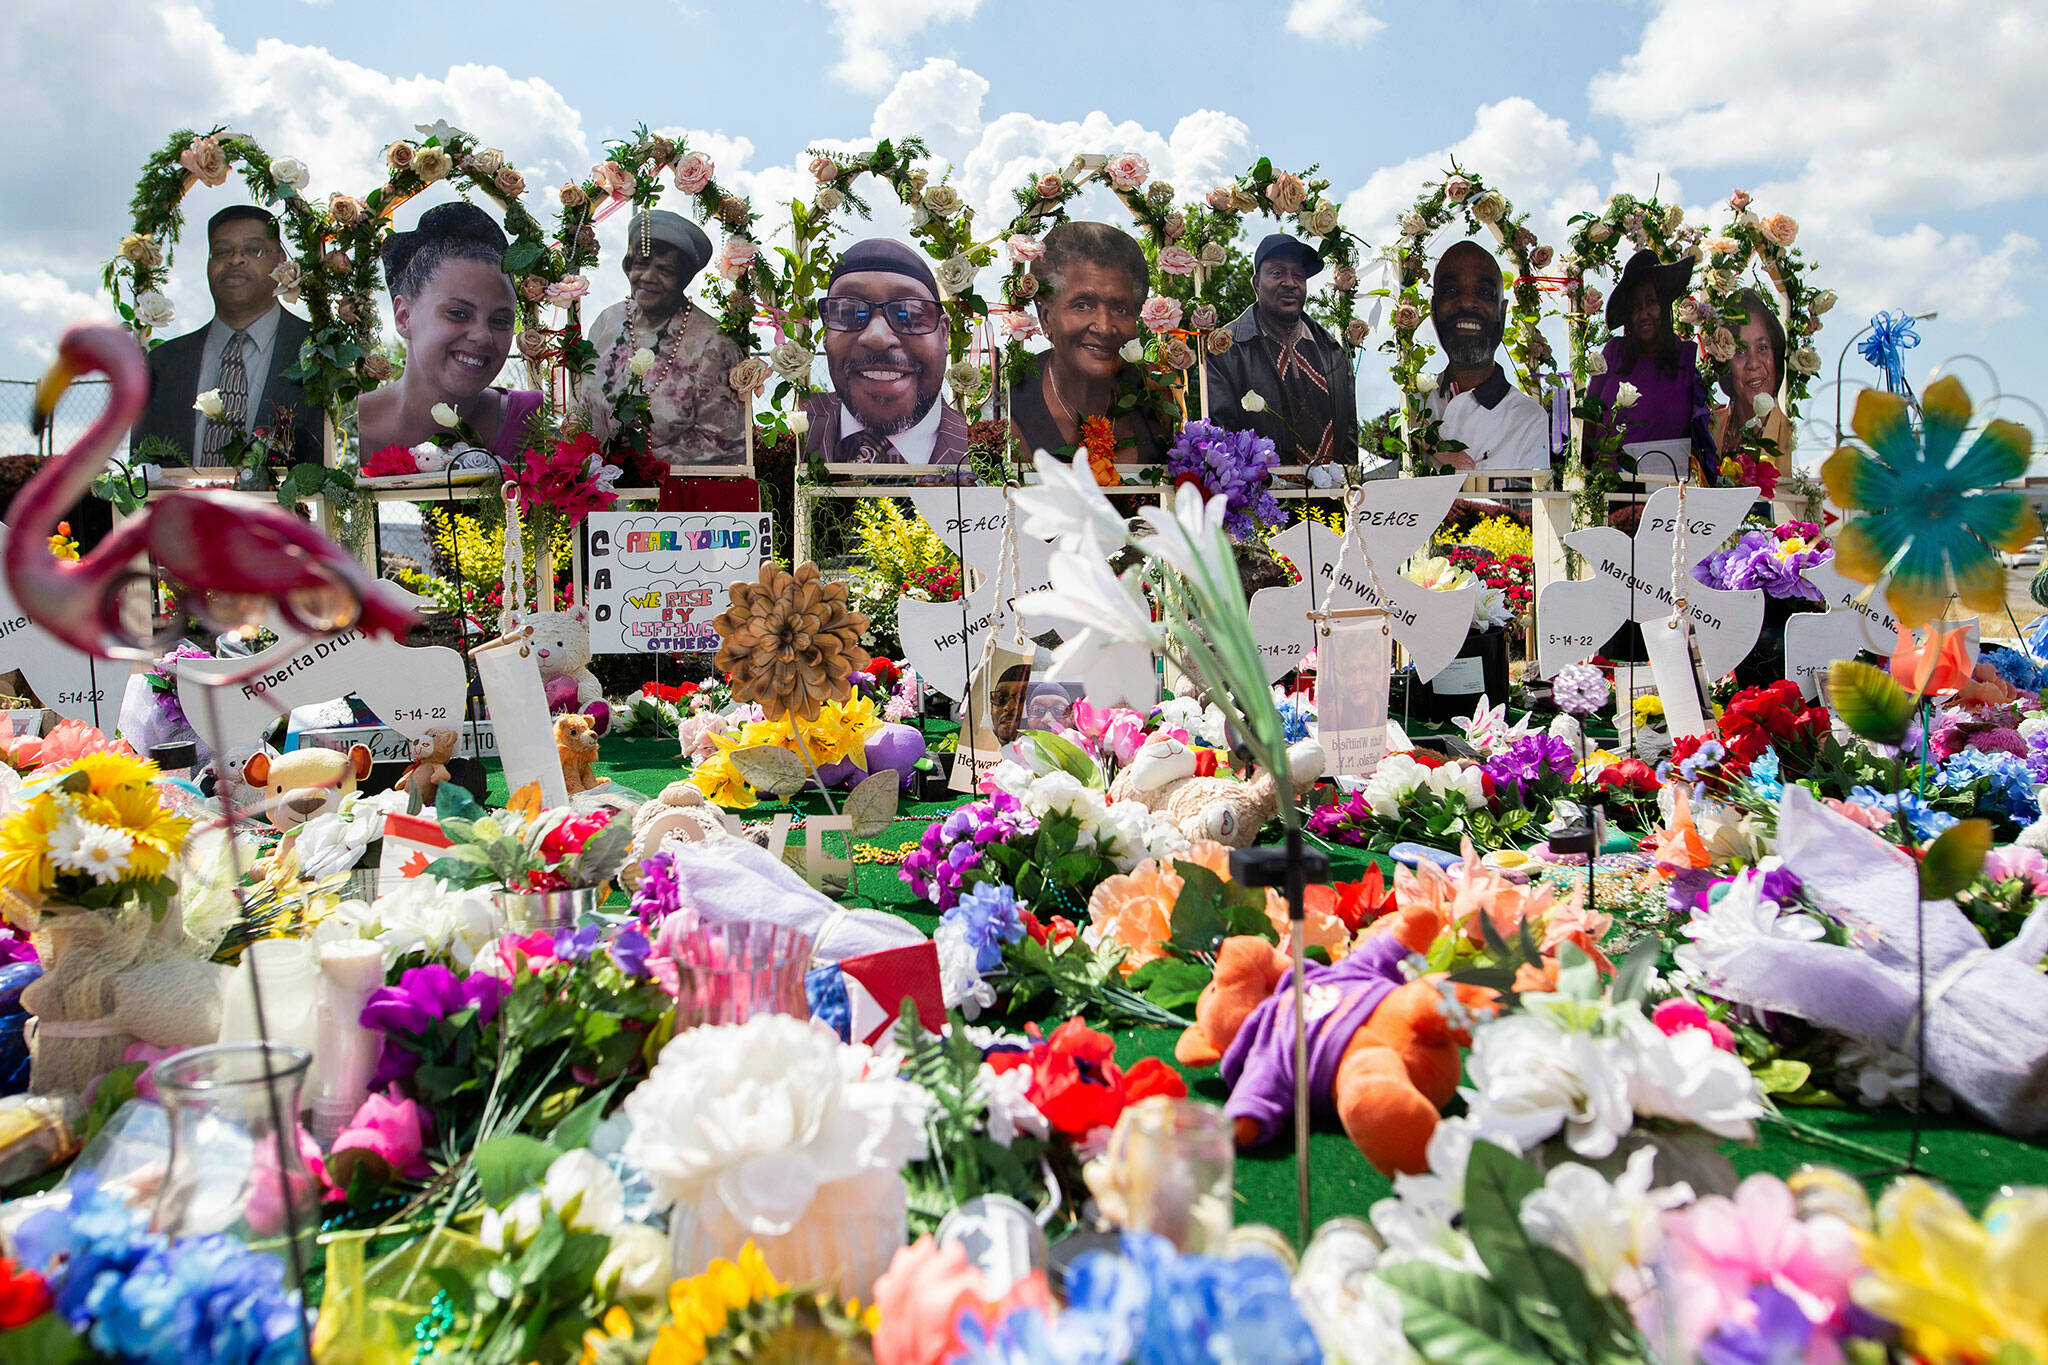 A memorial for the supermarket shooting victims is set up outside the Tops Friendly Market on July 14, in Buffalo, N.Y. (AP Photo /Joshua Bessex)